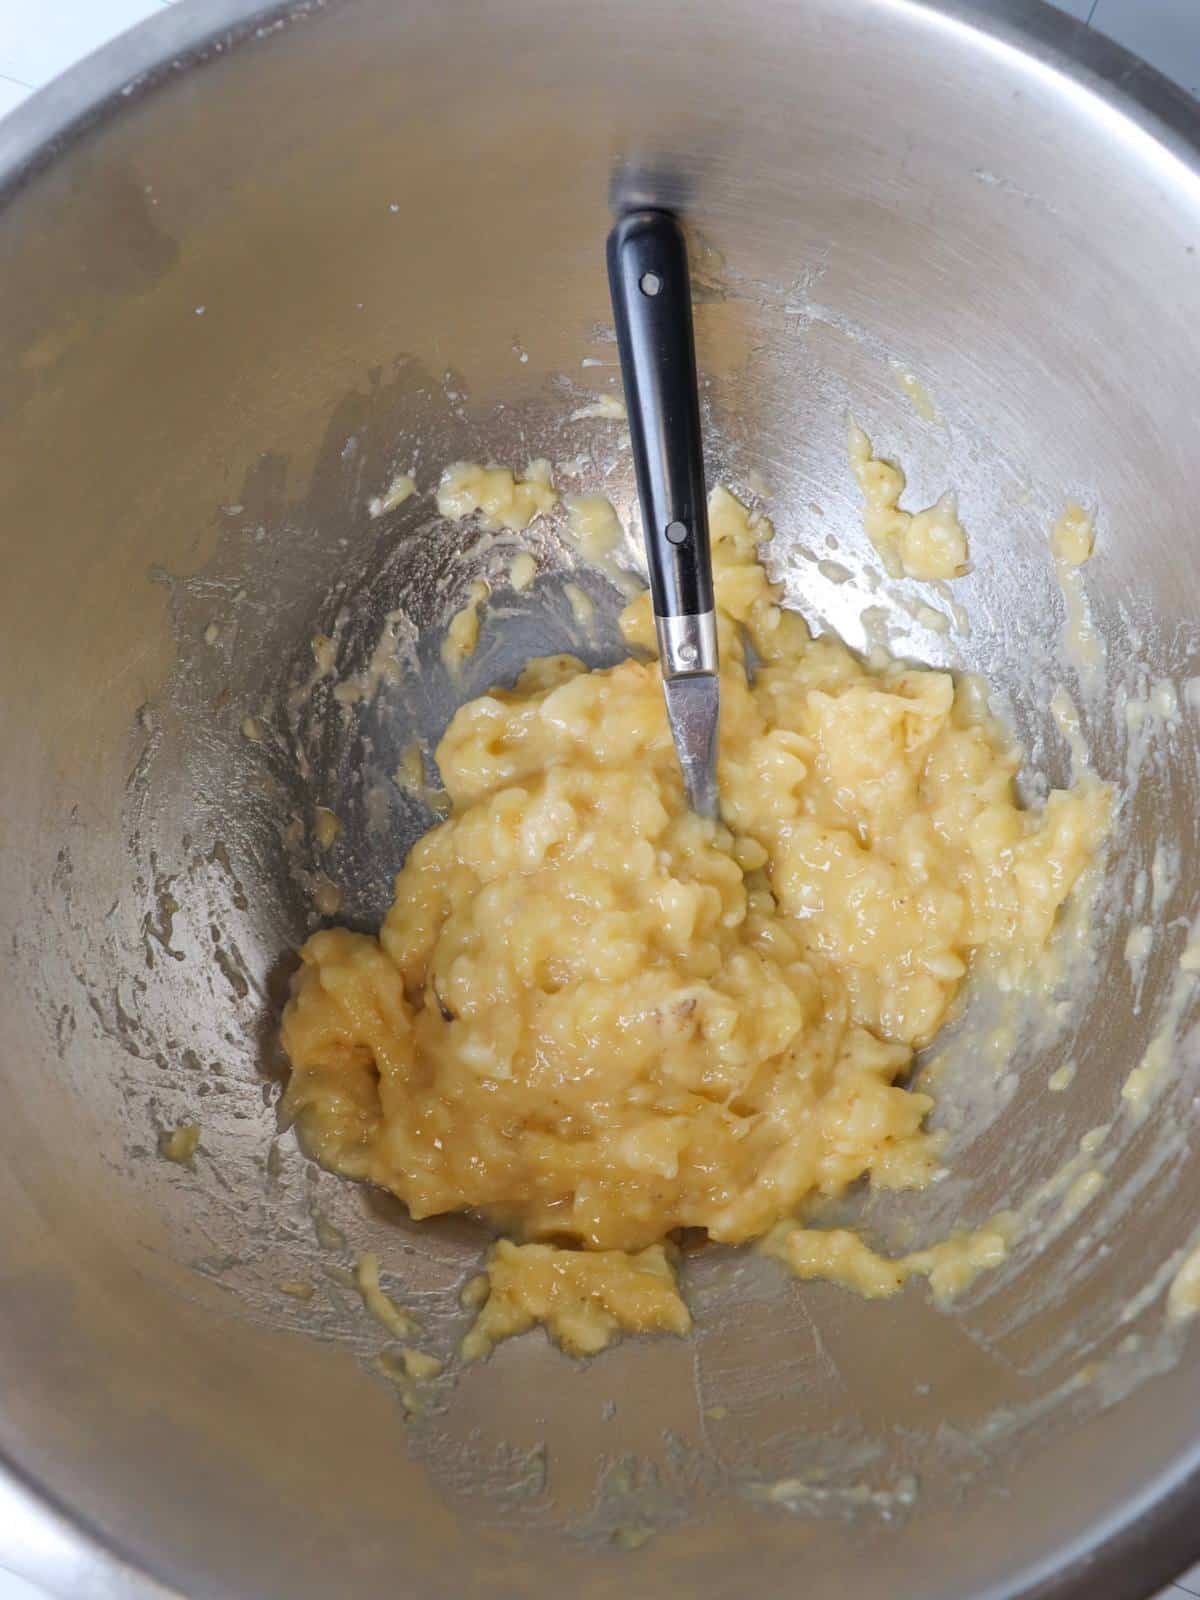 Mashed banana in a mixing bowl with a fork.